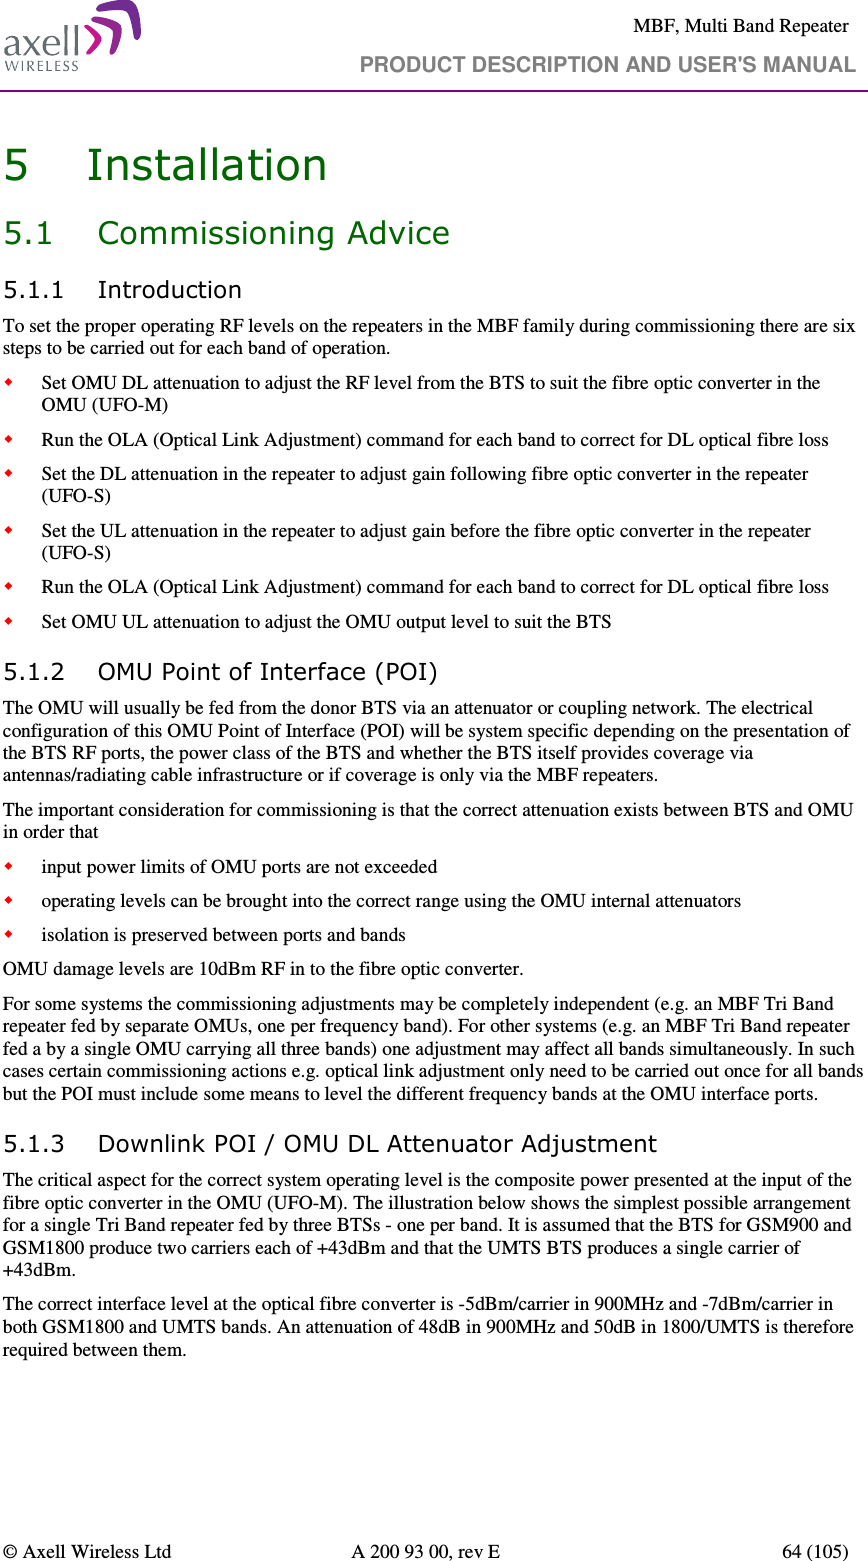     MBF, Multi Band Repeater                                     PRODUCT DESCRIPTION AND USER&apos;S MANUAL   © Axell Wireless Ltd  A 200 93 00, rev E  64 (105)  5 Installation 5.1 Commissioning Advice 5.1.1 Introduction To set the proper operating RF levels on the repeaters in the MBF family during commissioning there are six steps to be carried out for each band of operation.  Set OMU DL attenuation to adjust the RF level from the BTS to suit the fibre optic converter in the OMU (UFO-M)  Run the OLA (Optical Link Adjustment) command for each band to correct for DL optical fibre loss  Set the DL attenuation in the repeater to adjust gain following fibre optic converter in the repeater (UFO-S)  Set the UL attenuation in the repeater to adjust gain before the fibre optic converter in the repeater (UFO-S)  Run the OLA (Optical Link Adjustment) command for each band to correct for DL optical fibre loss  Set OMU UL attenuation to adjust the OMU output level to suit the BTS    5.1.2 OMU Point of Interface (POI) The OMU will usually be fed from the donor BTS via an attenuator or coupling network. The electrical configuration of this OMU Point of Interface (POI) will be system specific depending on the presentation of the BTS RF ports, the power class of the BTS and whether the BTS itself provides coverage via antennas/radiating cable infrastructure or if coverage is only via the MBF repeaters.  The important consideration for commissioning is that the correct attenuation exists between BTS and OMU in order that   input power limits of OMU ports are not exceeded  operating levels can be brought into the correct range using the OMU internal attenuators  isolation is preserved between ports and bands  OMU damage levels are 10dBm RF in to the fibre optic converter. For some systems the commissioning adjustments may be completely independent (e.g. an MBF Tri Band repeater fed by separate OMUs, one per frequency band). For other systems (e.g. an MBF Tri Band repeater fed a by a single OMU carrying all three bands) one adjustment may affect all bands simultaneously. In such cases certain commissioning actions e.g. optical link adjustment only need to be carried out once for all bands but the POI must include some means to level the different frequency bands at the OMU interface ports.  5.1.3 Downlink POI / OMU DL Attenuator Adjustment The critical aspect for the correct system operating level is the composite power presented at the input of the fibre optic converter in the OMU (UFO-M). The illustration below shows the simplest possible arrangement for a single Tri Band repeater fed by three BTSs - one per band. It is assumed that the BTS for GSM900 and GSM1800 produce two carriers each of +43dBm and that the UMTS BTS produces a single carrier of +43dBm.  The correct interface level at the optical fibre converter is -5dBm/carrier in 900MHz and -7dBm/carrier in both GSM1800 and UMTS bands. An attenuation of 48dB in 900MHz and 50dB in 1800/UMTS is therefore required between them.     